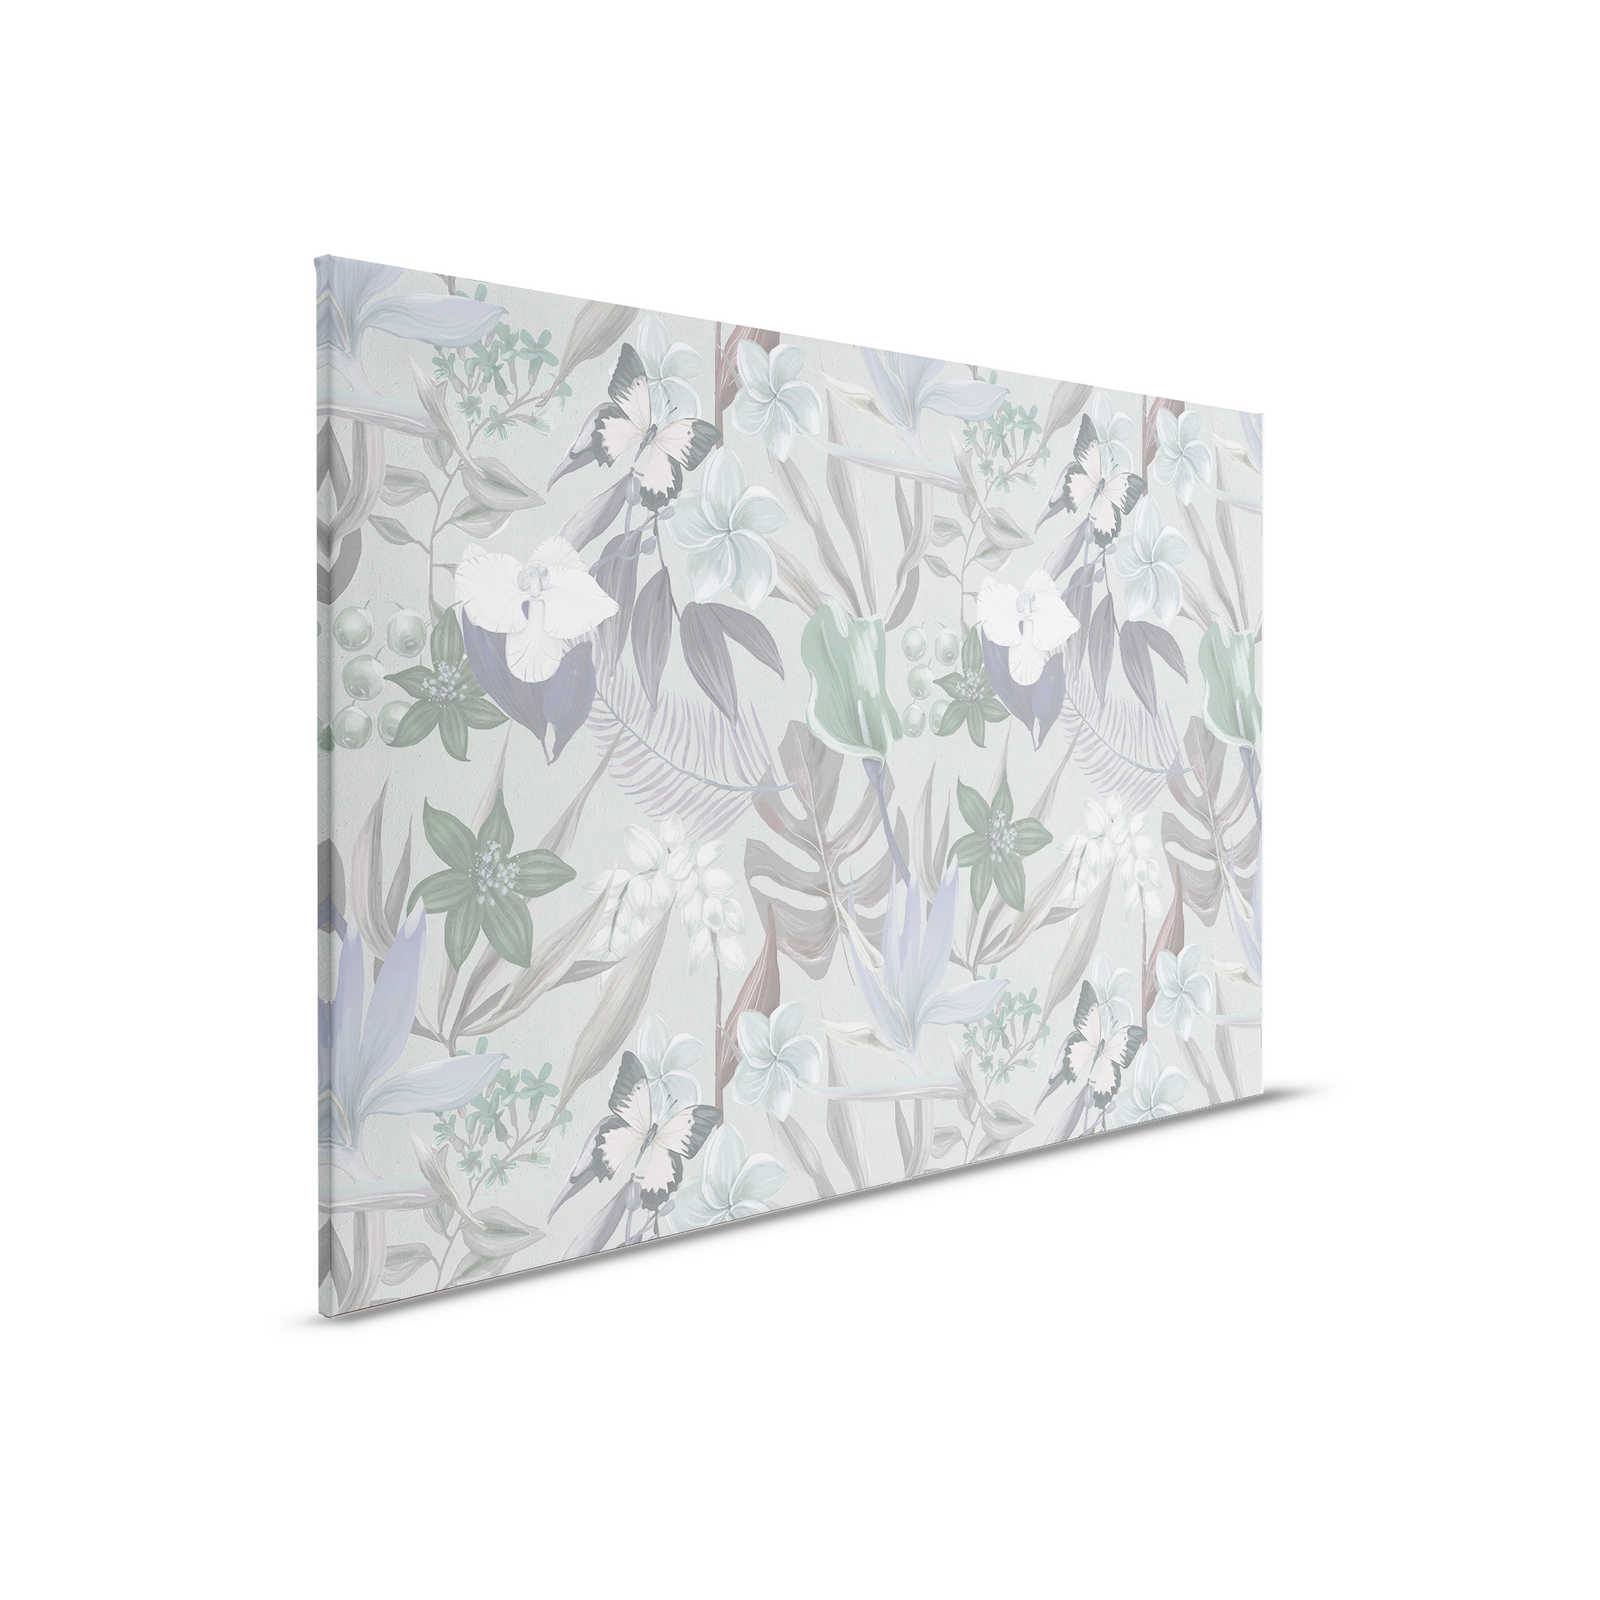 Floral Jungle Canvas Painting drawn | green, white - 0.90 m x 0.60 m
